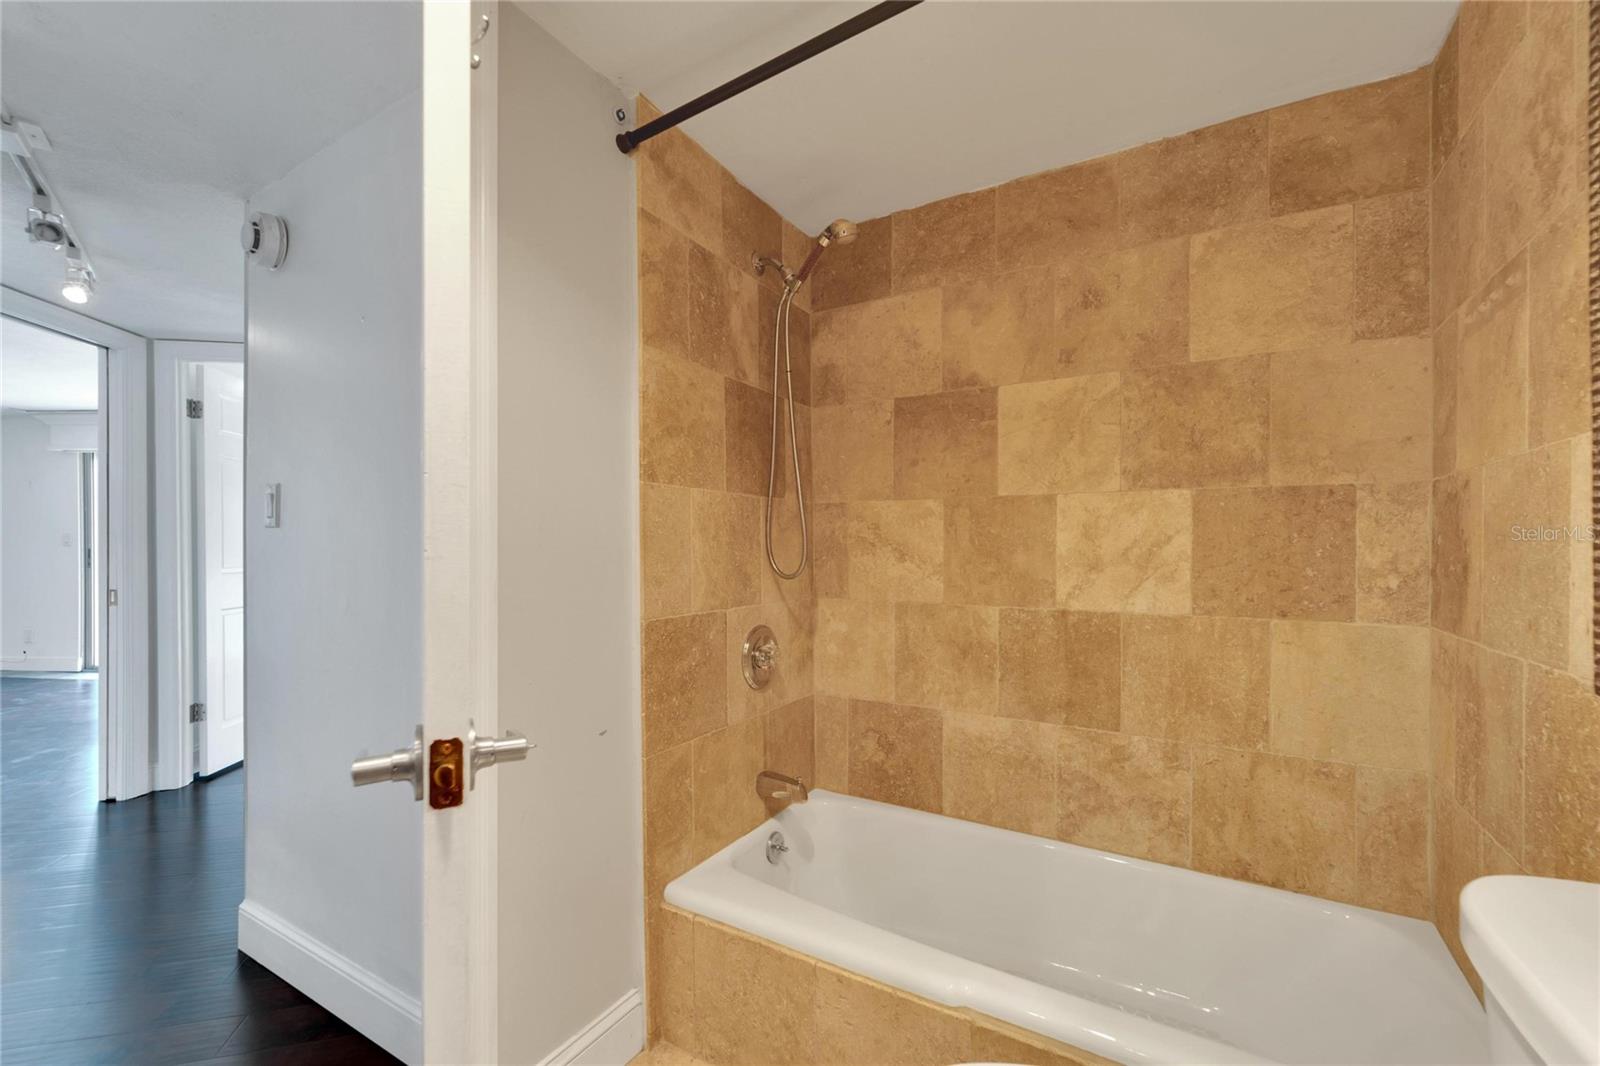 BEAUTIFULLY TRAVERNTINE TILE SHOWER AREA